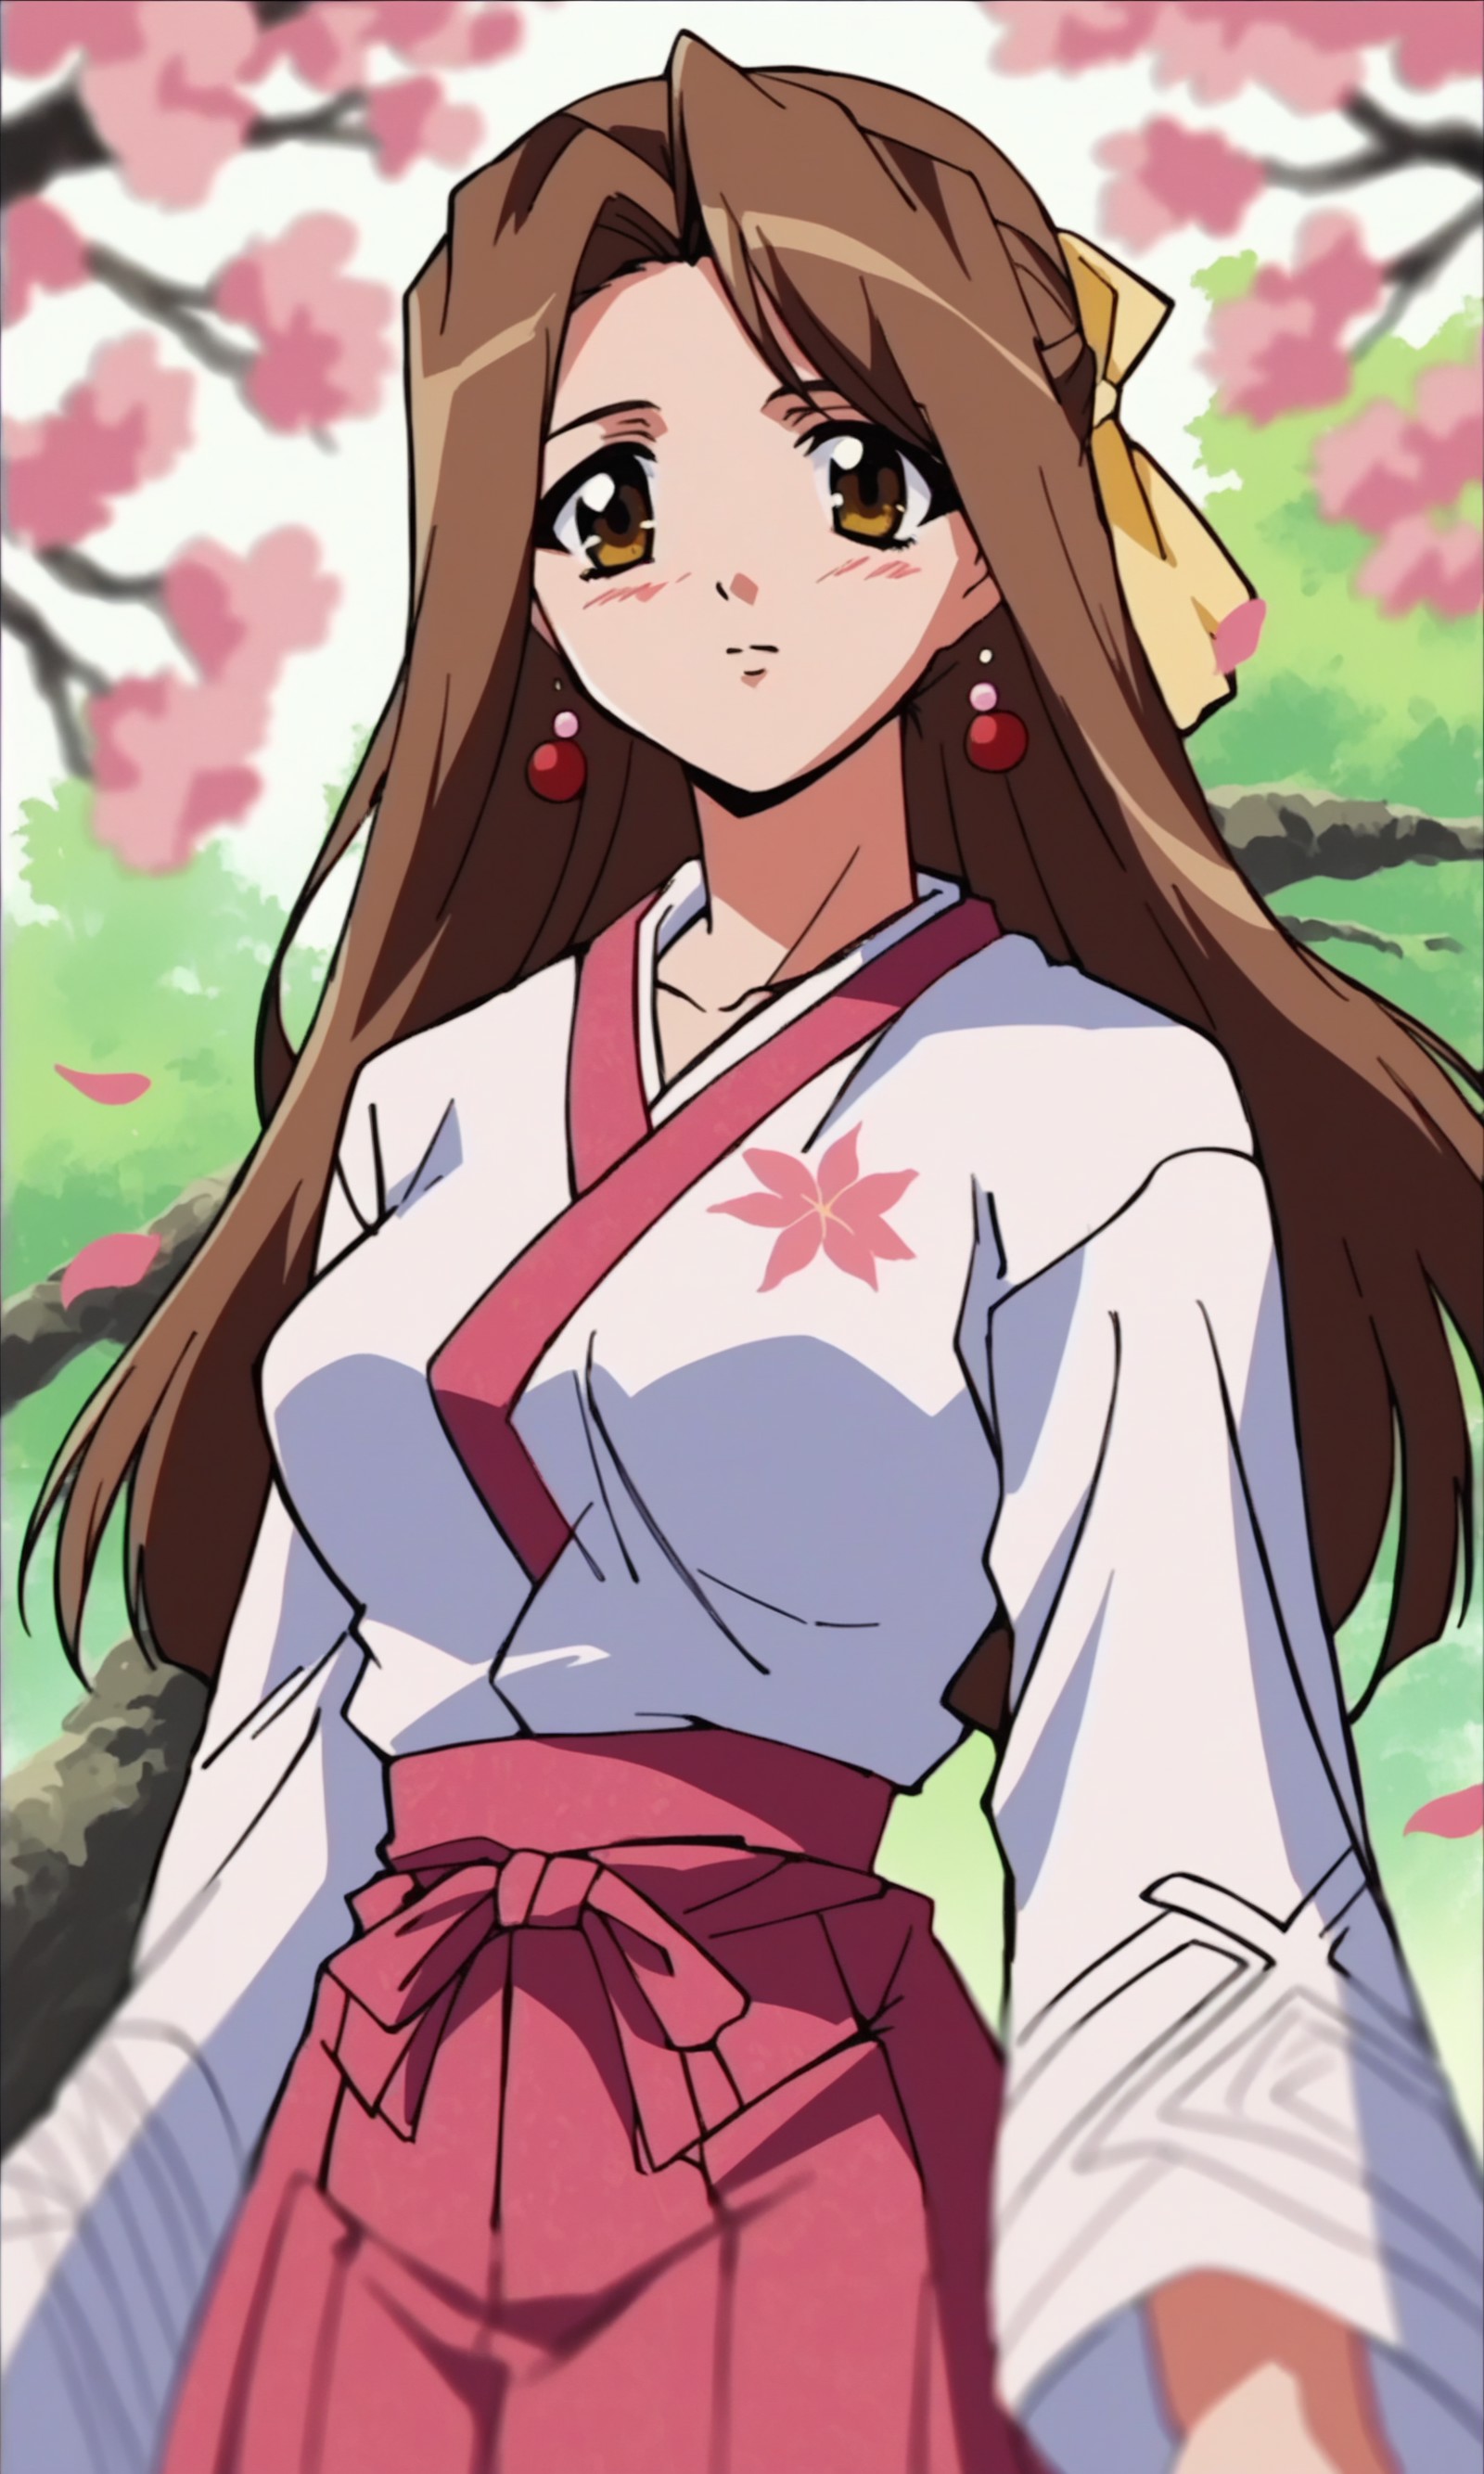 (score_9,score_8_up,score_7_up),source_anime,
1990s anime, 1girl, solo, long hair, close up face, pink hakama, cherry blos...